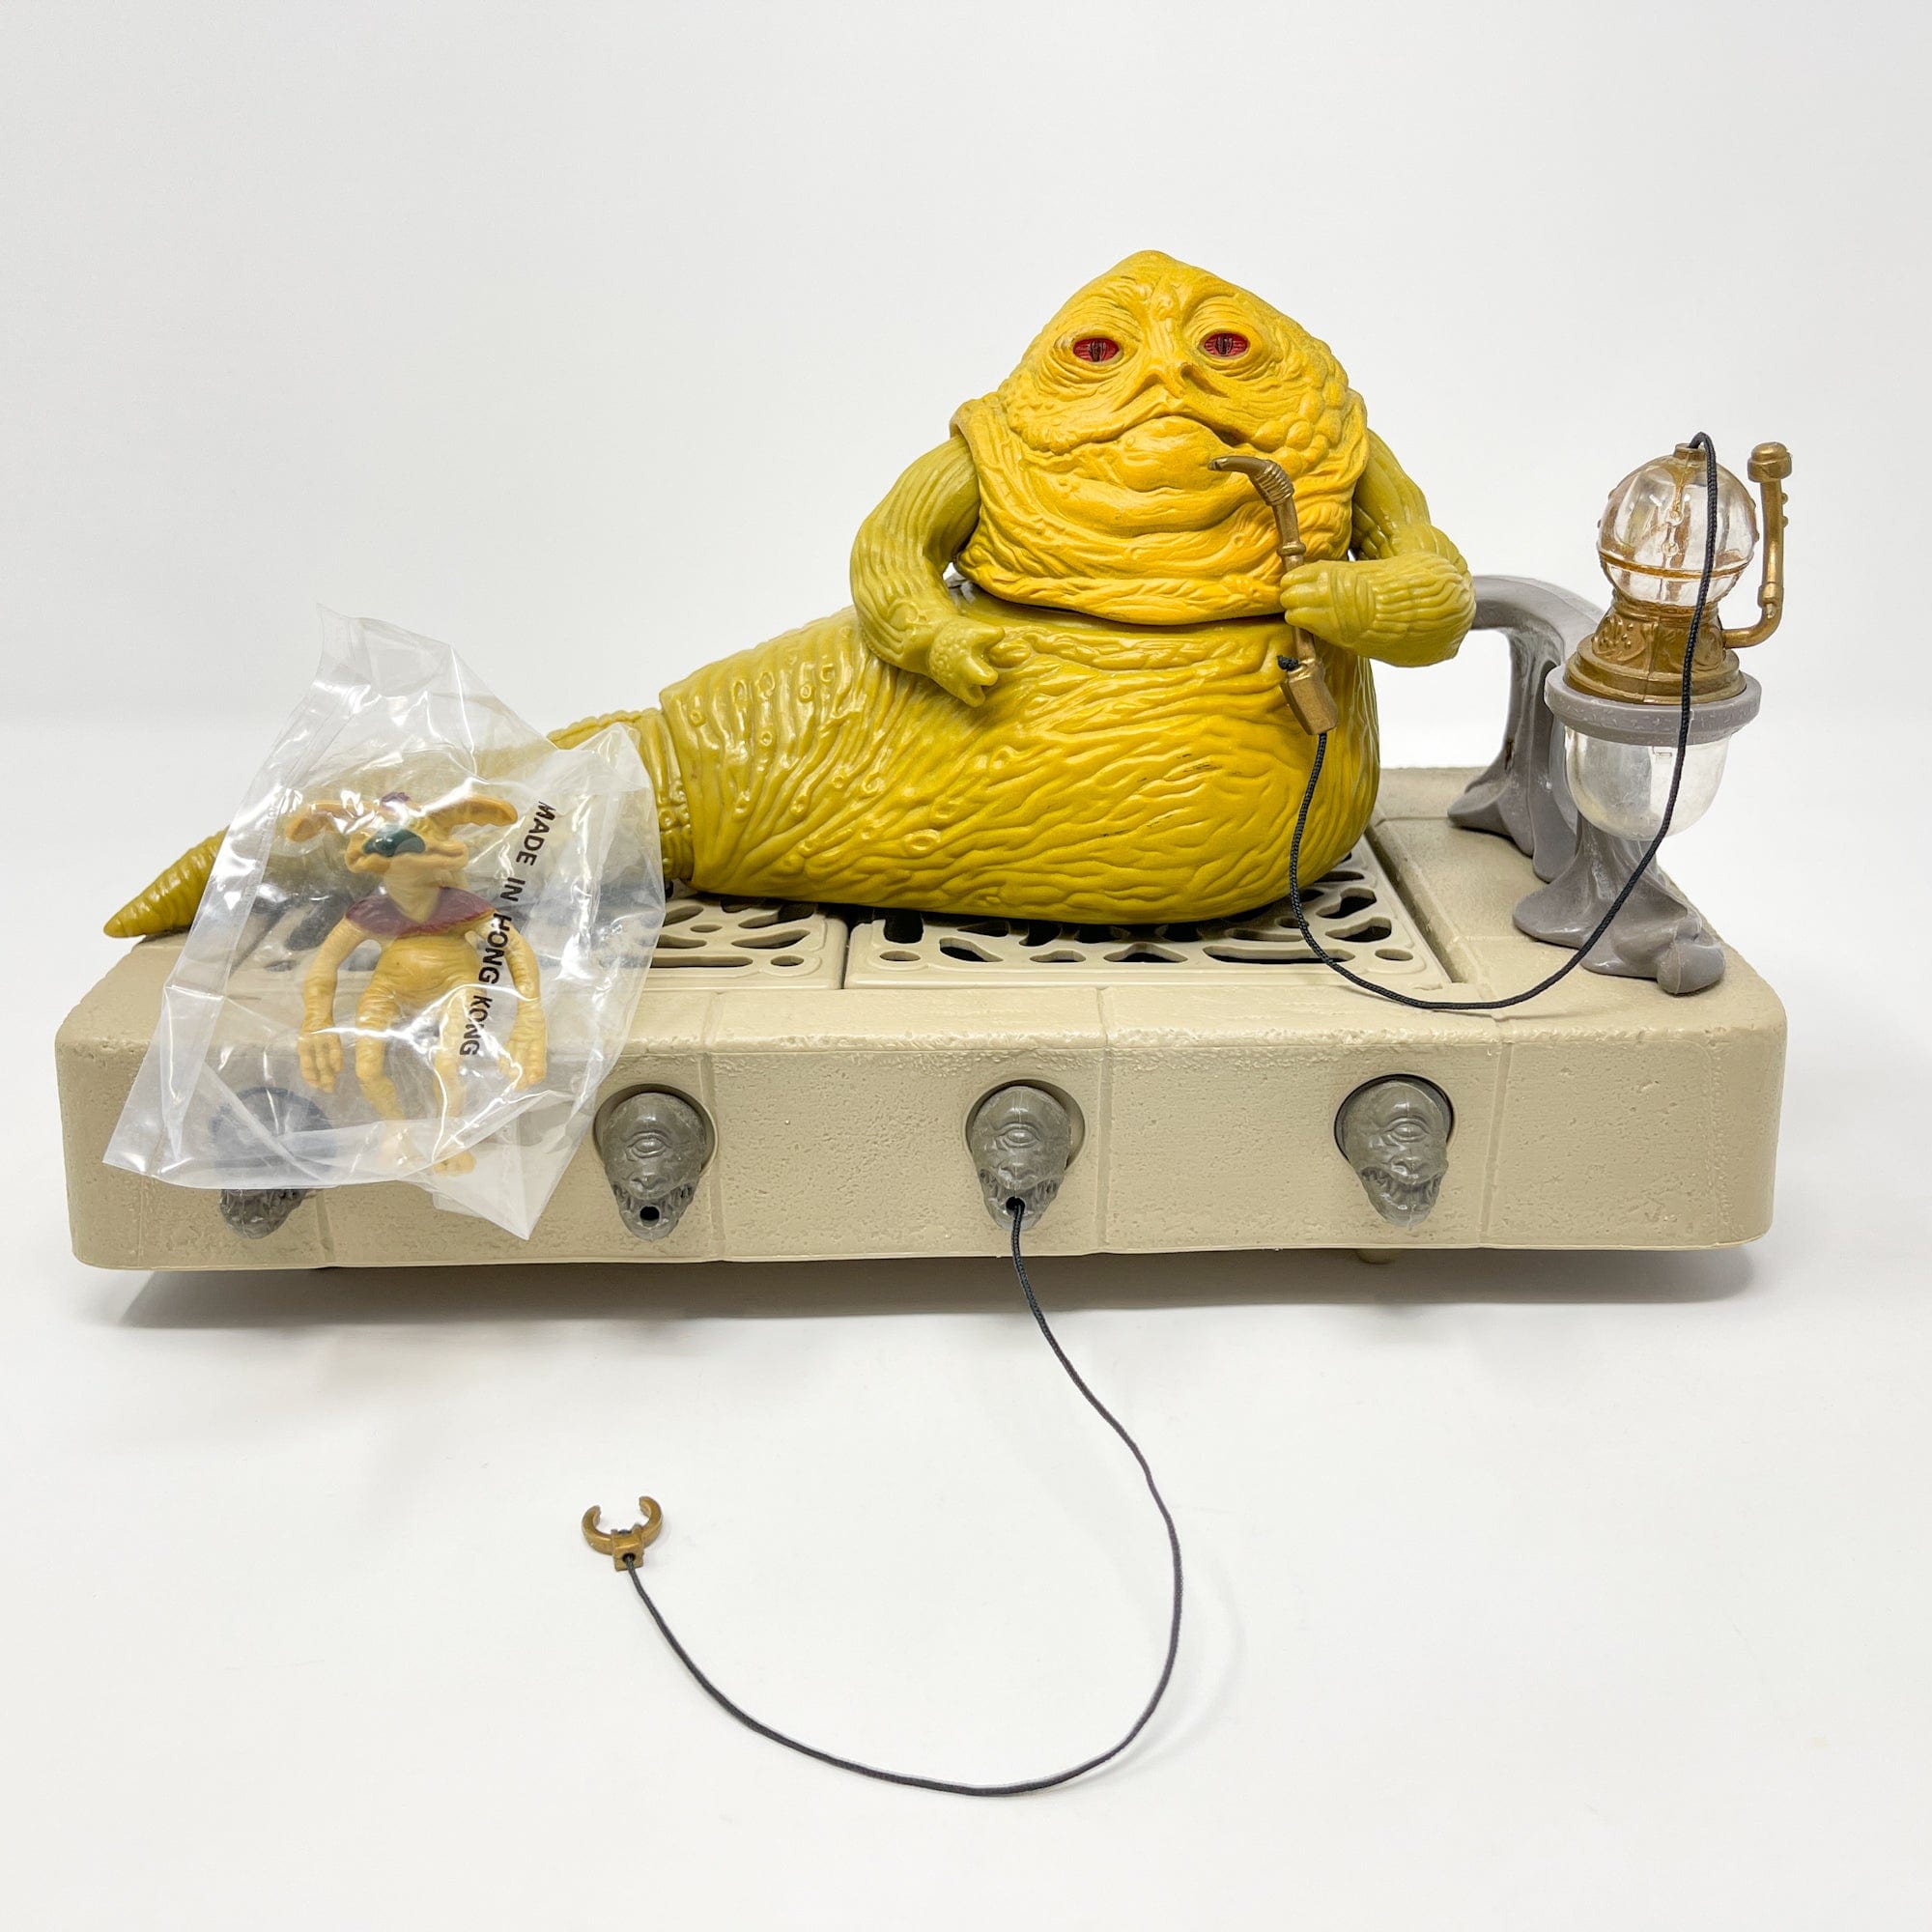 Vintage Star Wars Kenner Vehicle Jabba The Hutt Playset Loose Complete 30888490532996 1024x1024@2x ?v=1656689841